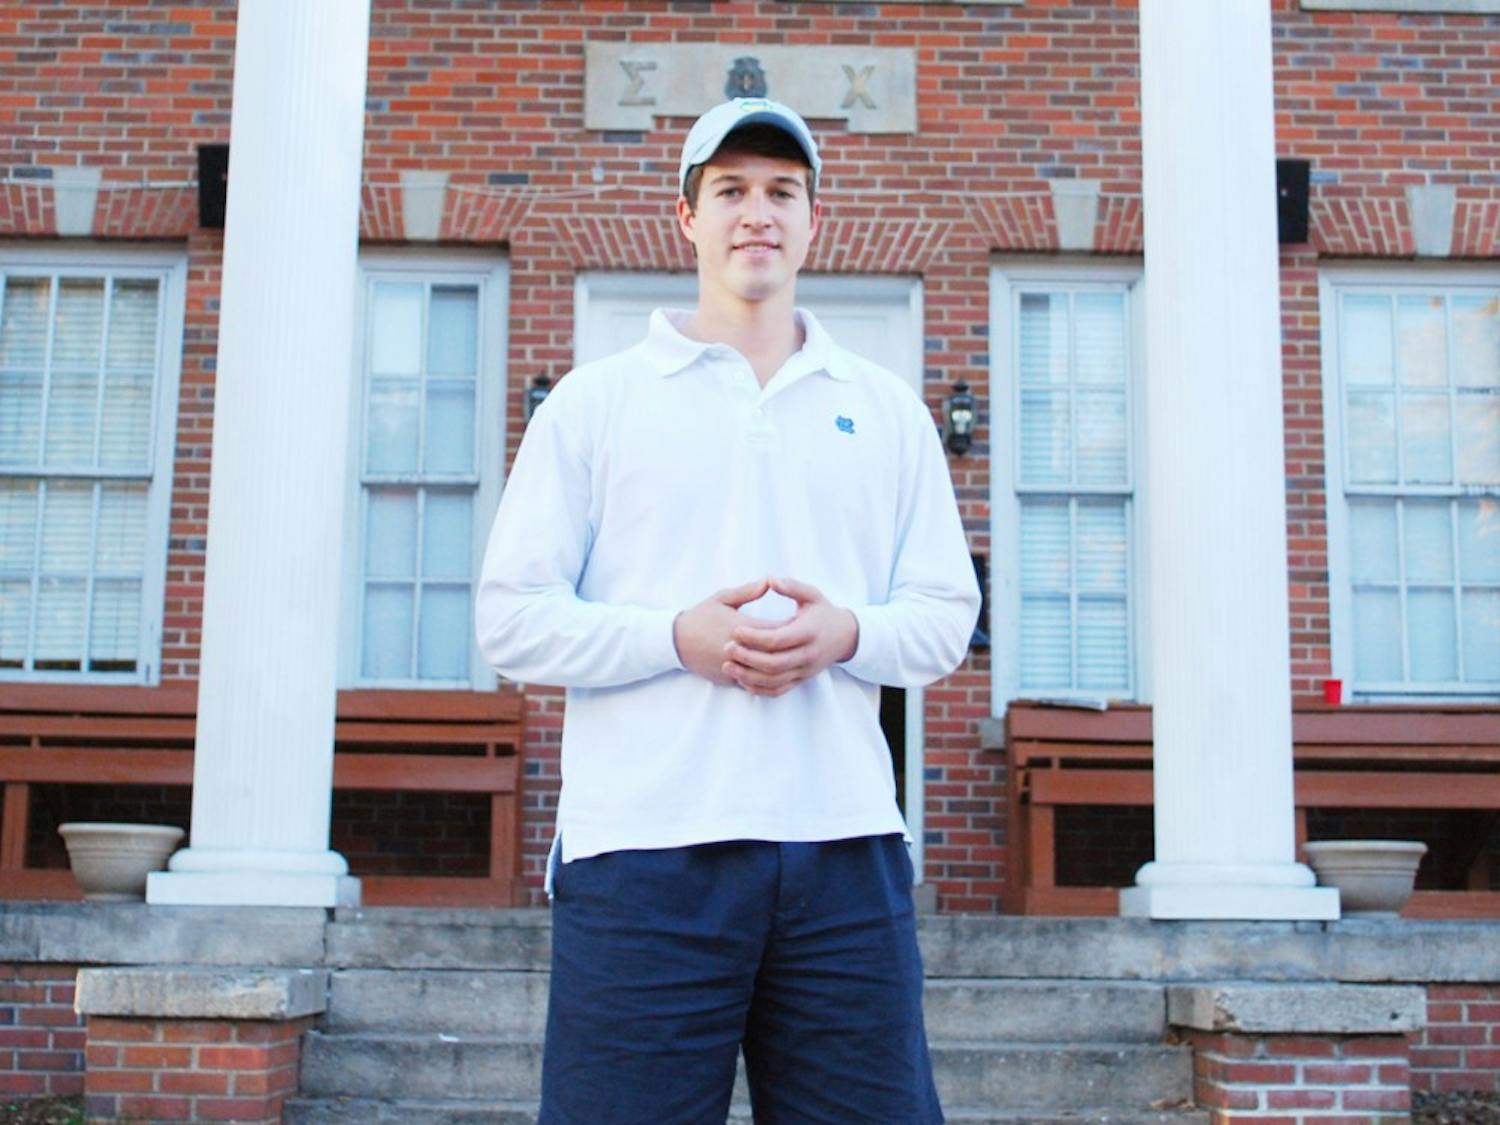 Photo: Interfraternity Council to elect new president (Josie Hollingsworth)